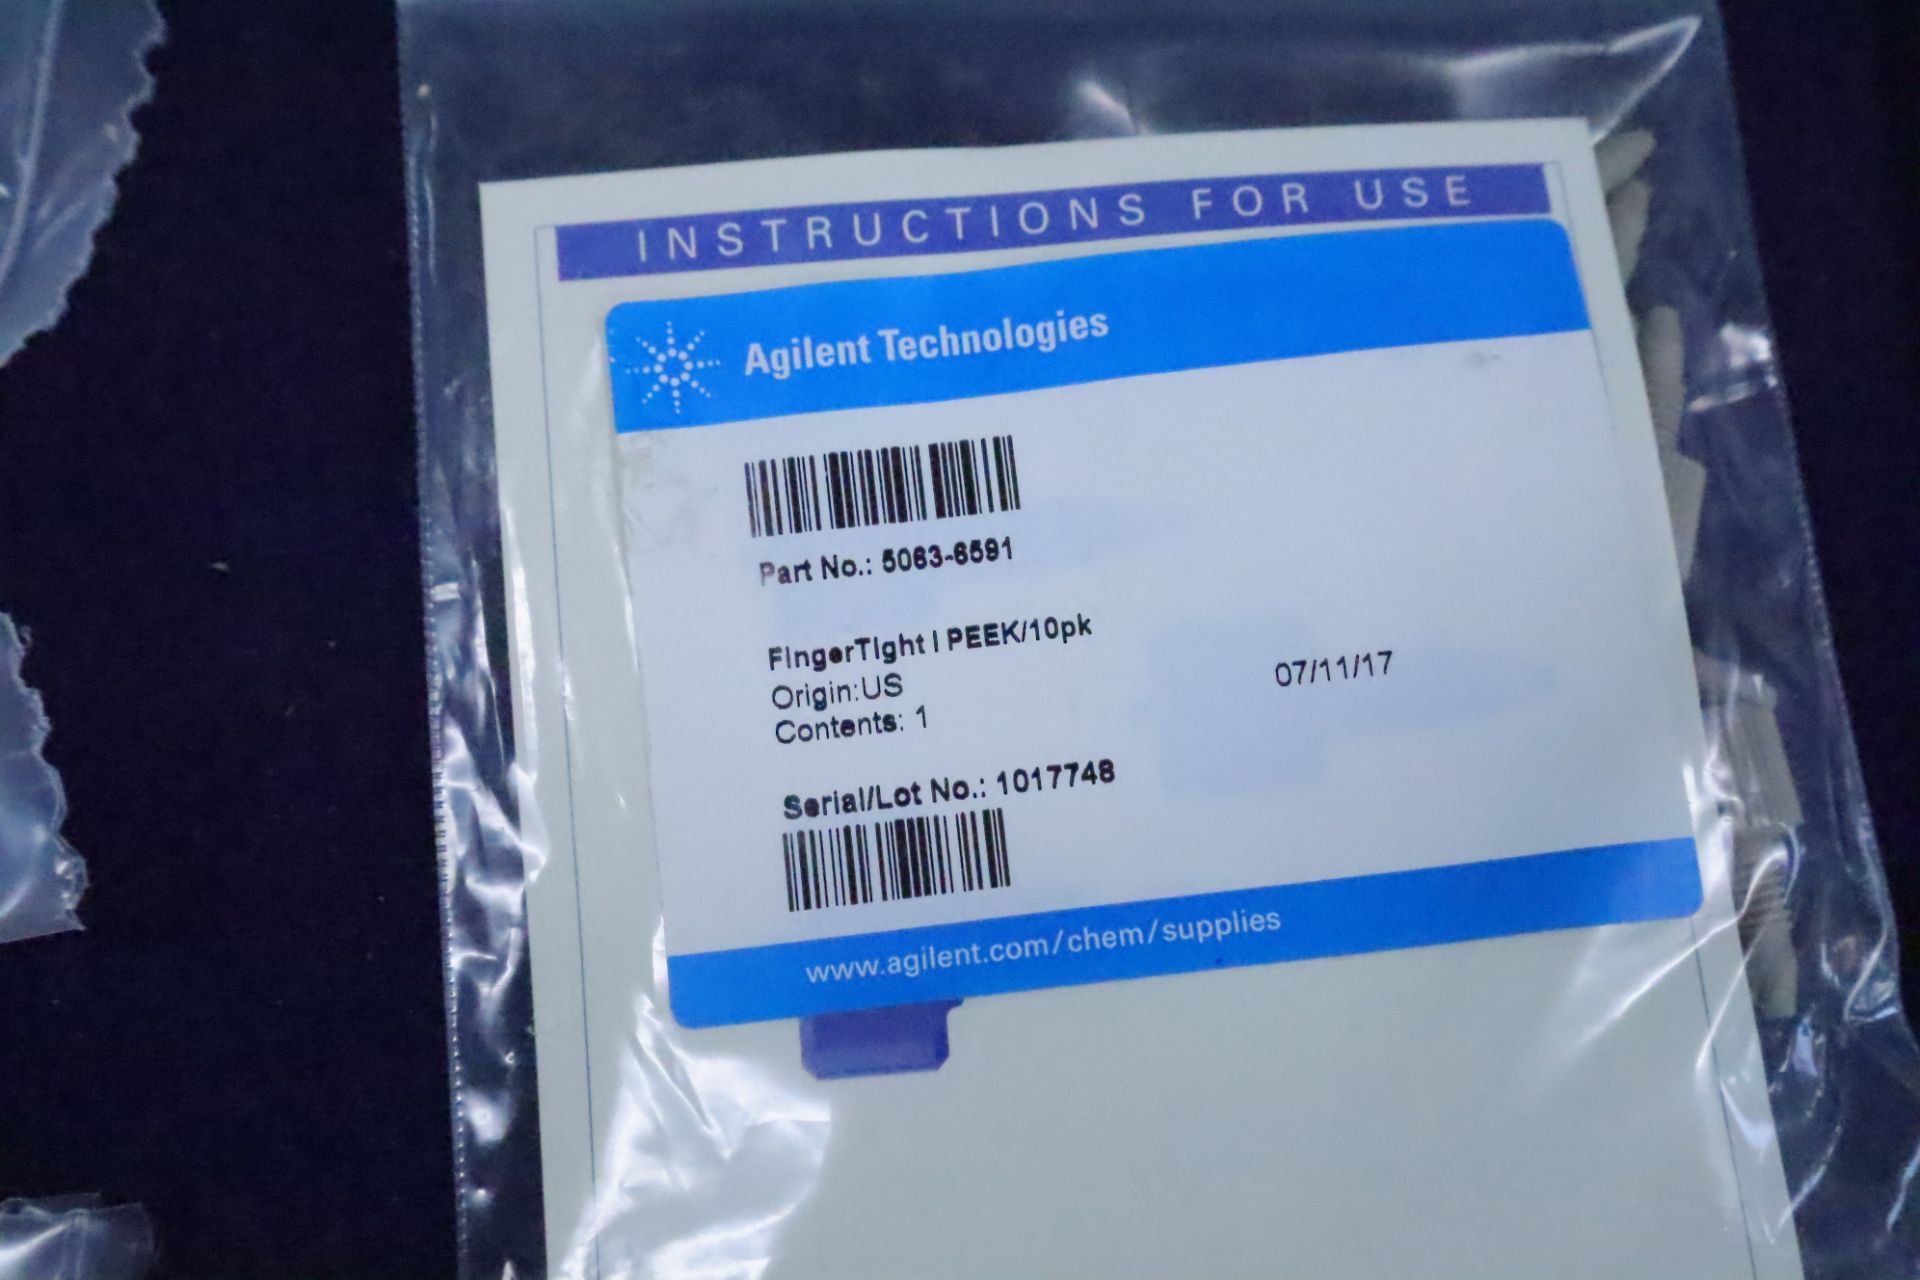 (NIB) Agilent Technologies OEM Replacement Parts for LC/MS Machines - Image 12 of 28